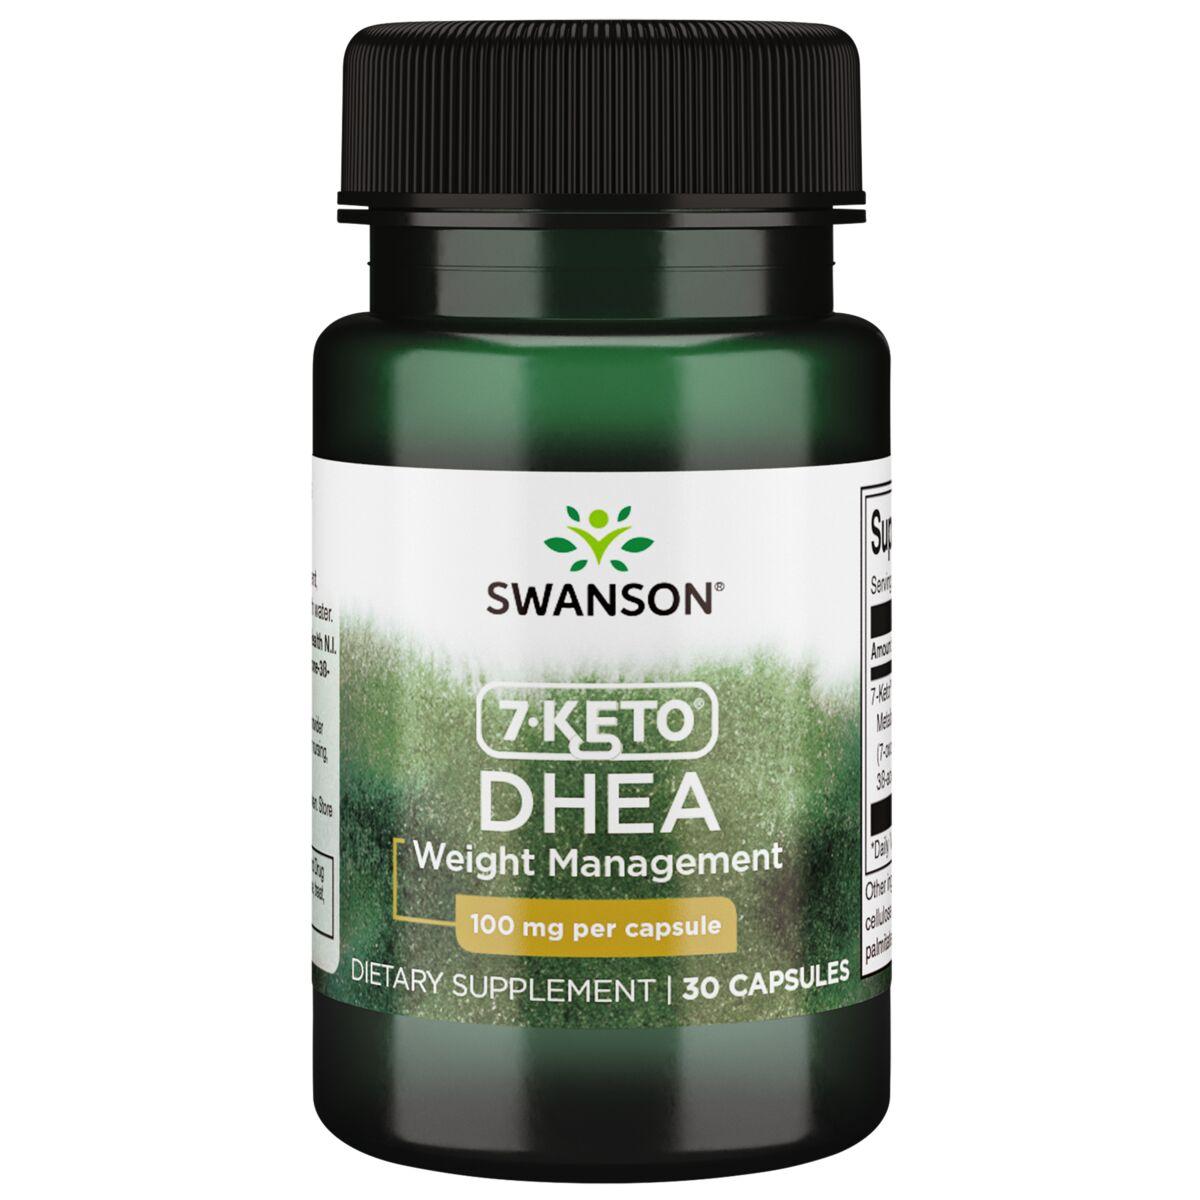 Swanson Best Weight-Control Formulas 7-Keto Dhea Supplement Vitamin 100 mg 30 Caps Weight Control Weight Management